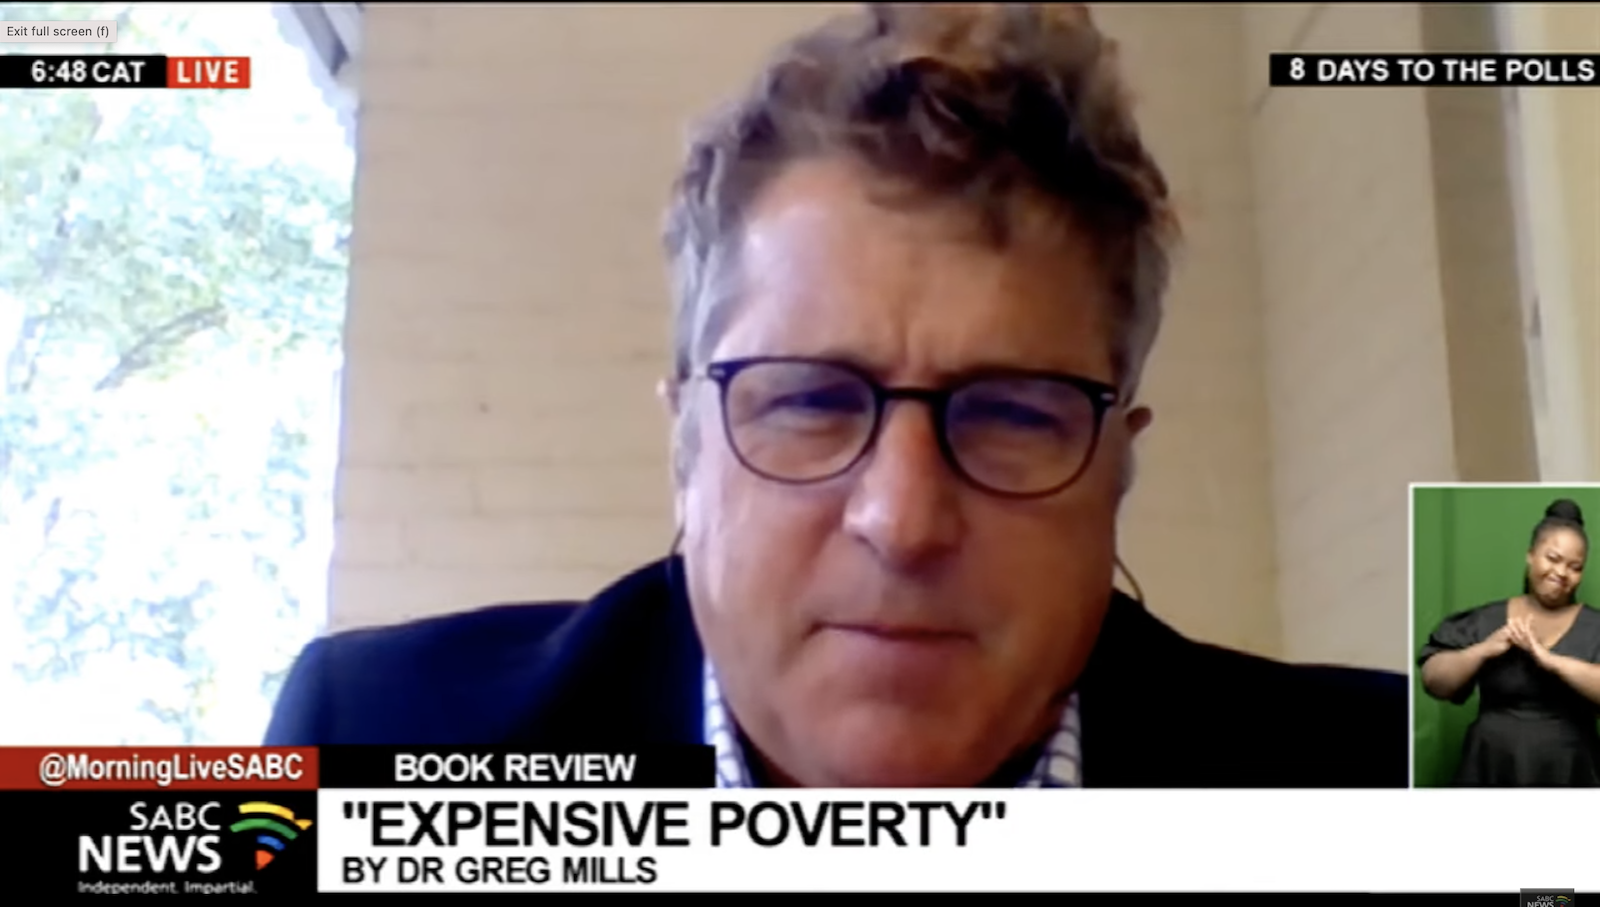 Book Review | "Expensive Poverty" by Dr Greg Mills on SABC News